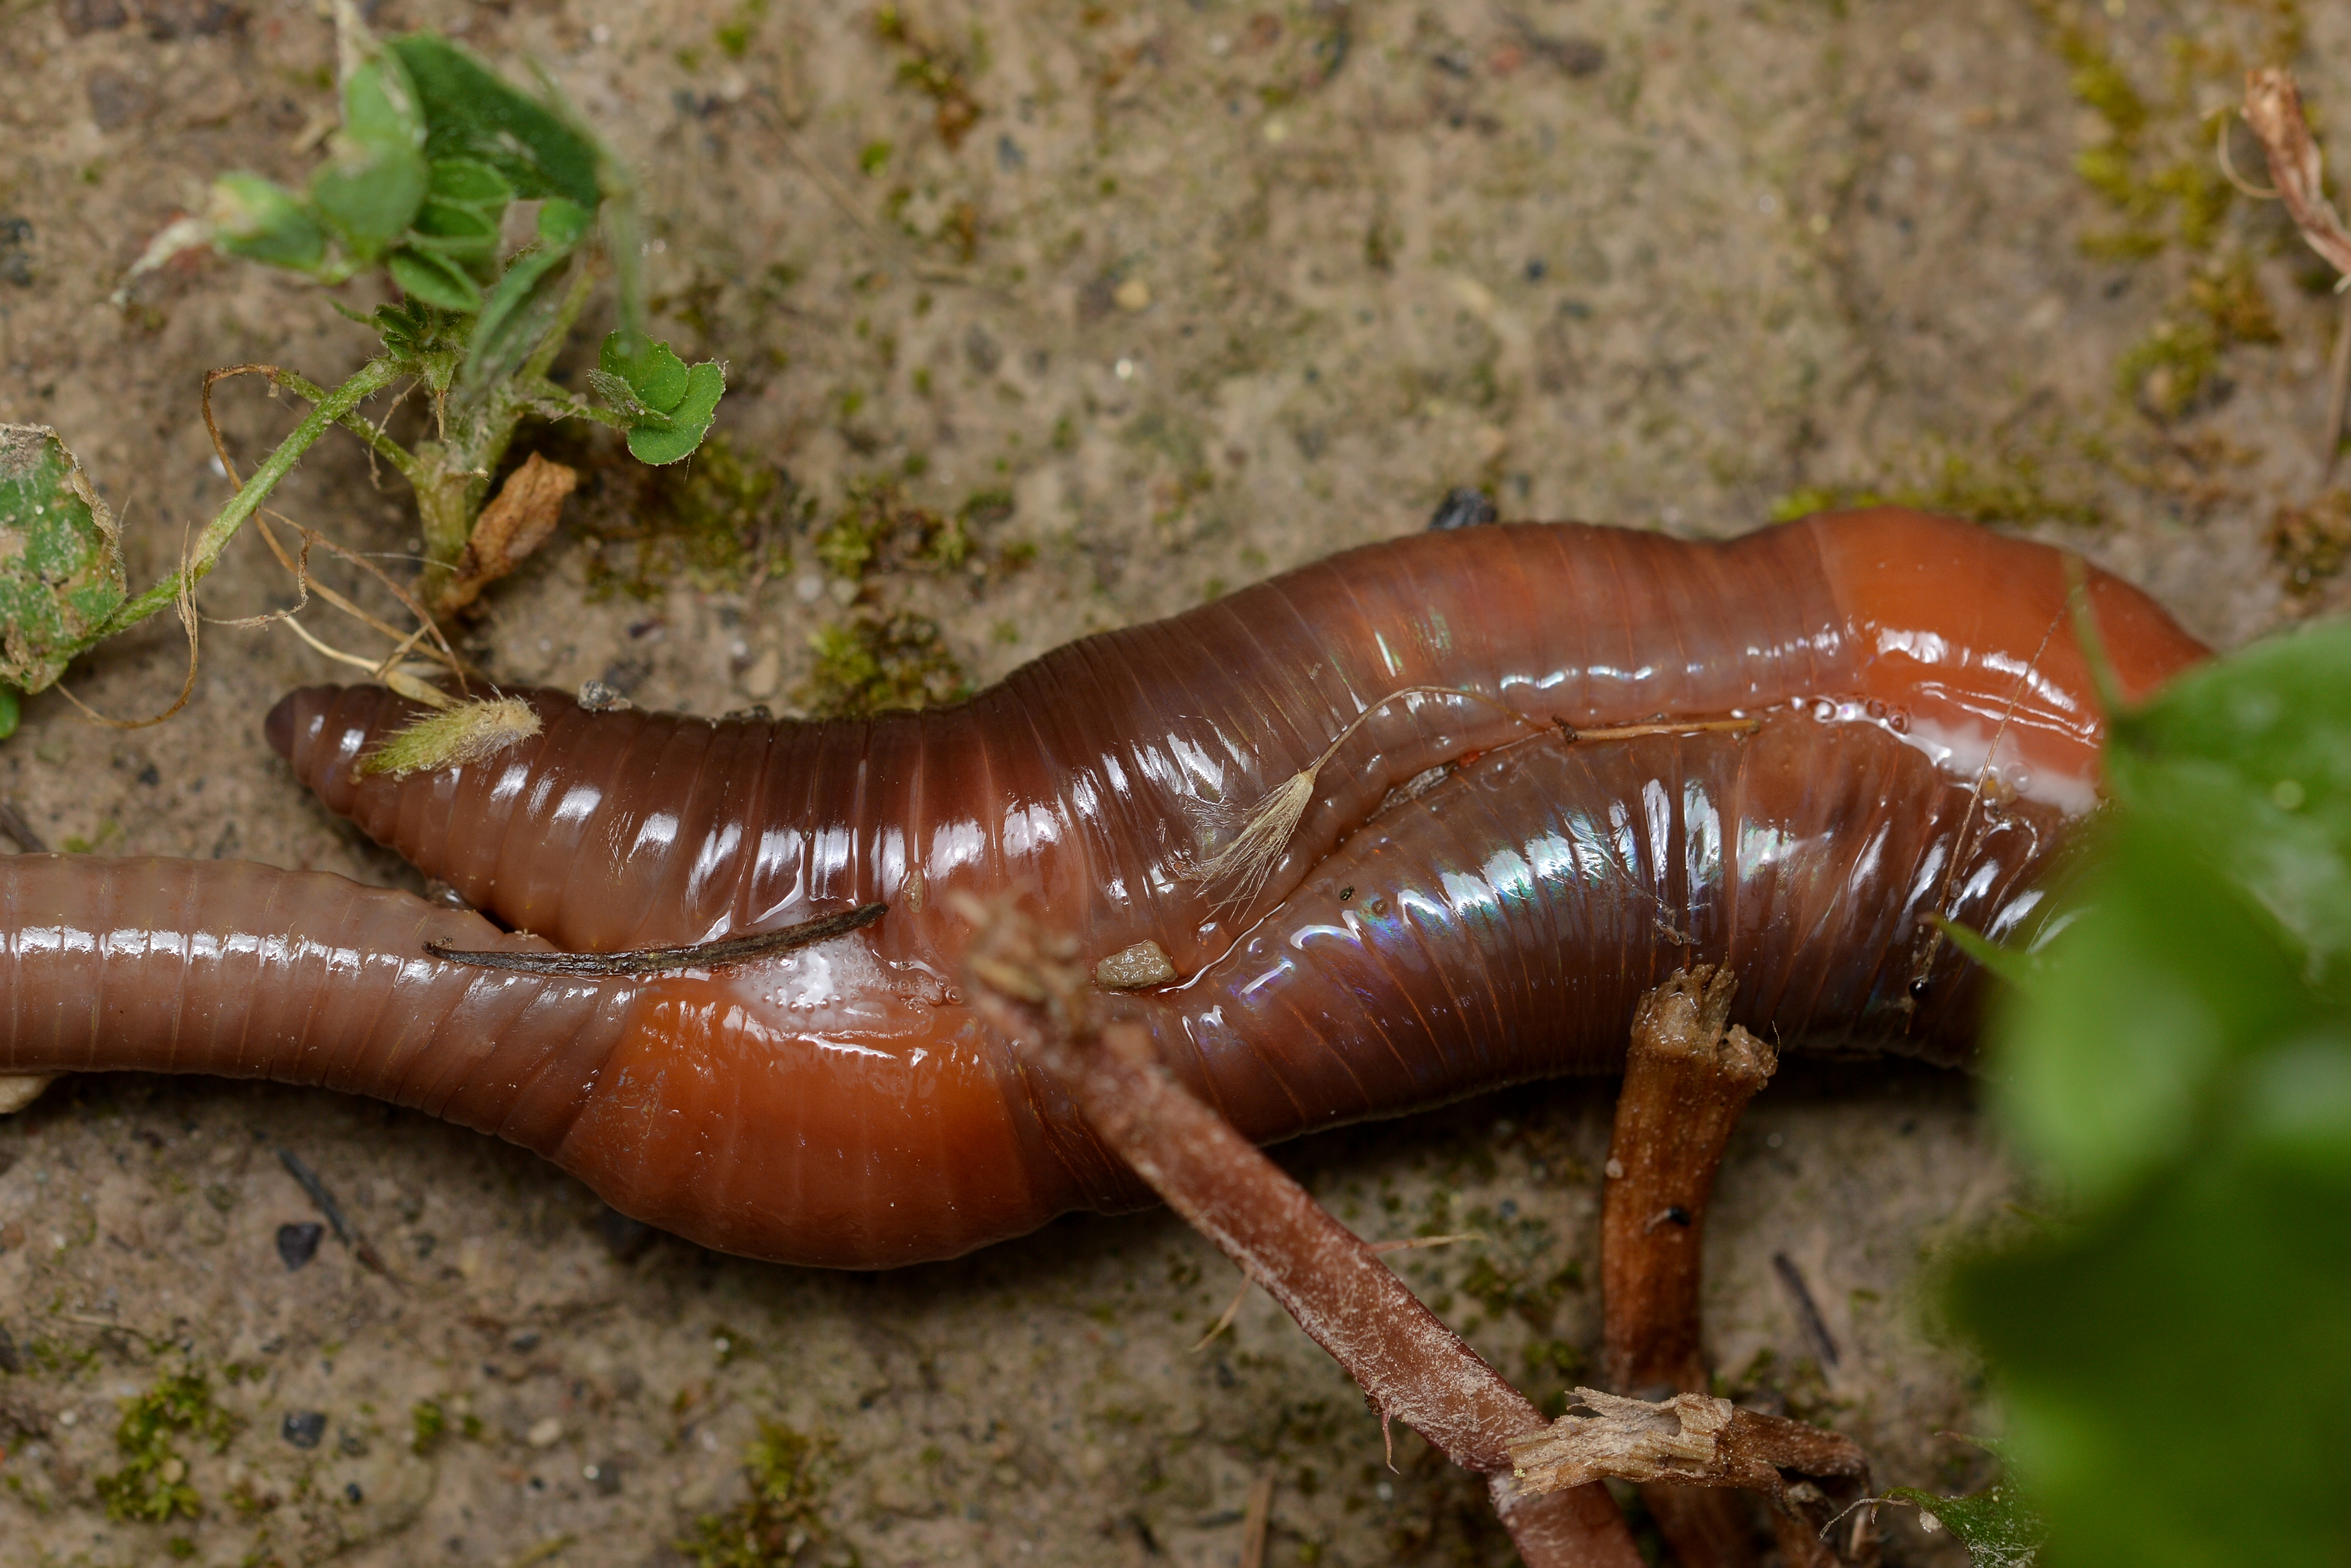 A pair of nightcrawlers aligned side-to-side and front-to-back. Earthworm sex.